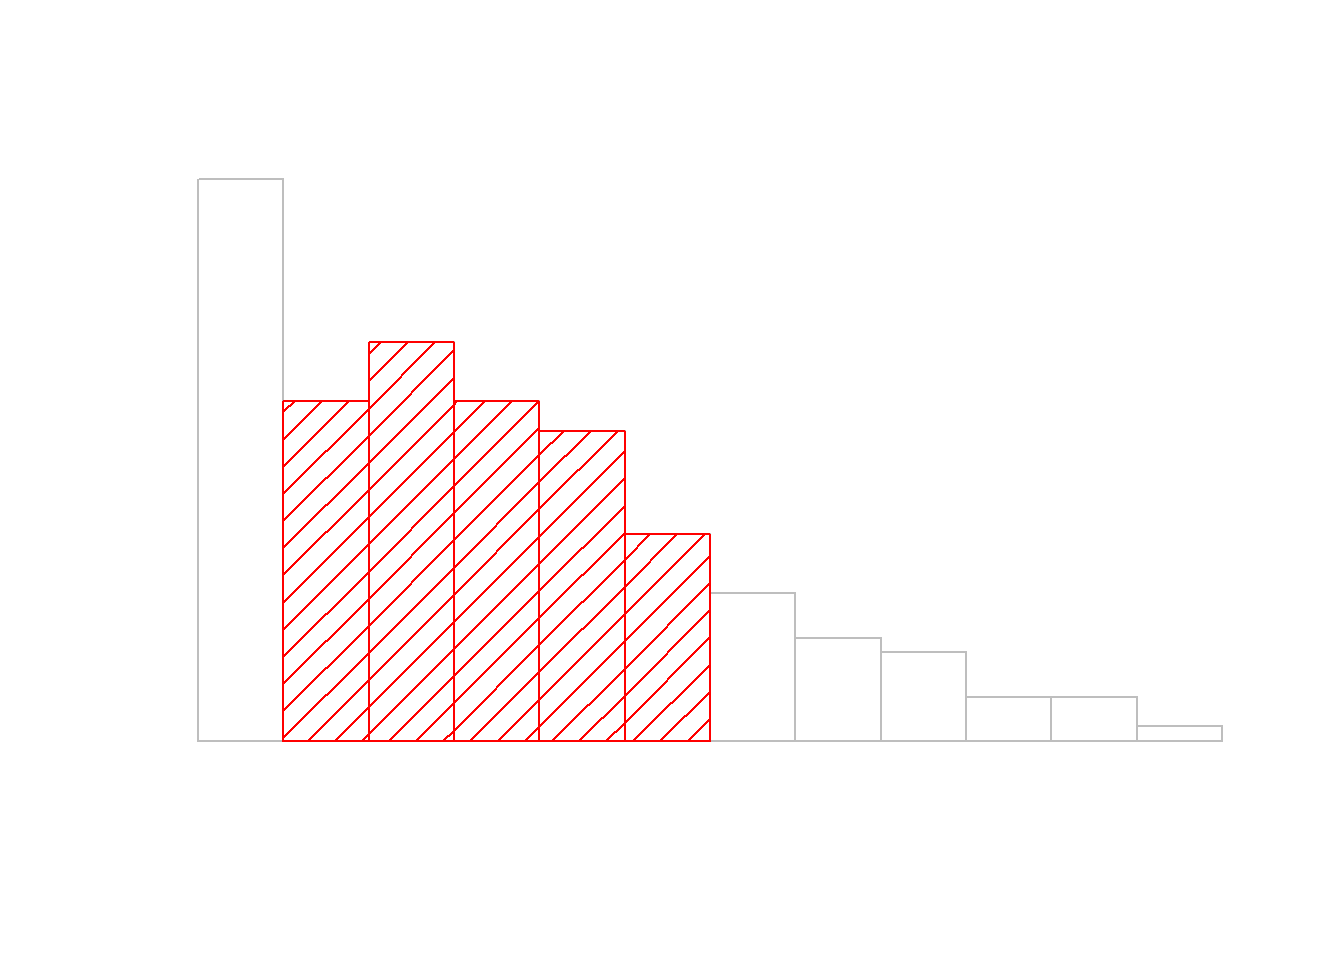 An illustration of the standard deviation, applied to the AFL winning margins data. The shaded bars in the histogram show how much of the data fall within one standard deviation of the mean. In this case, 65.3% of the data set lies within this range, which is pretty consistent with the "approximately 68% rule" discussed in the main text.